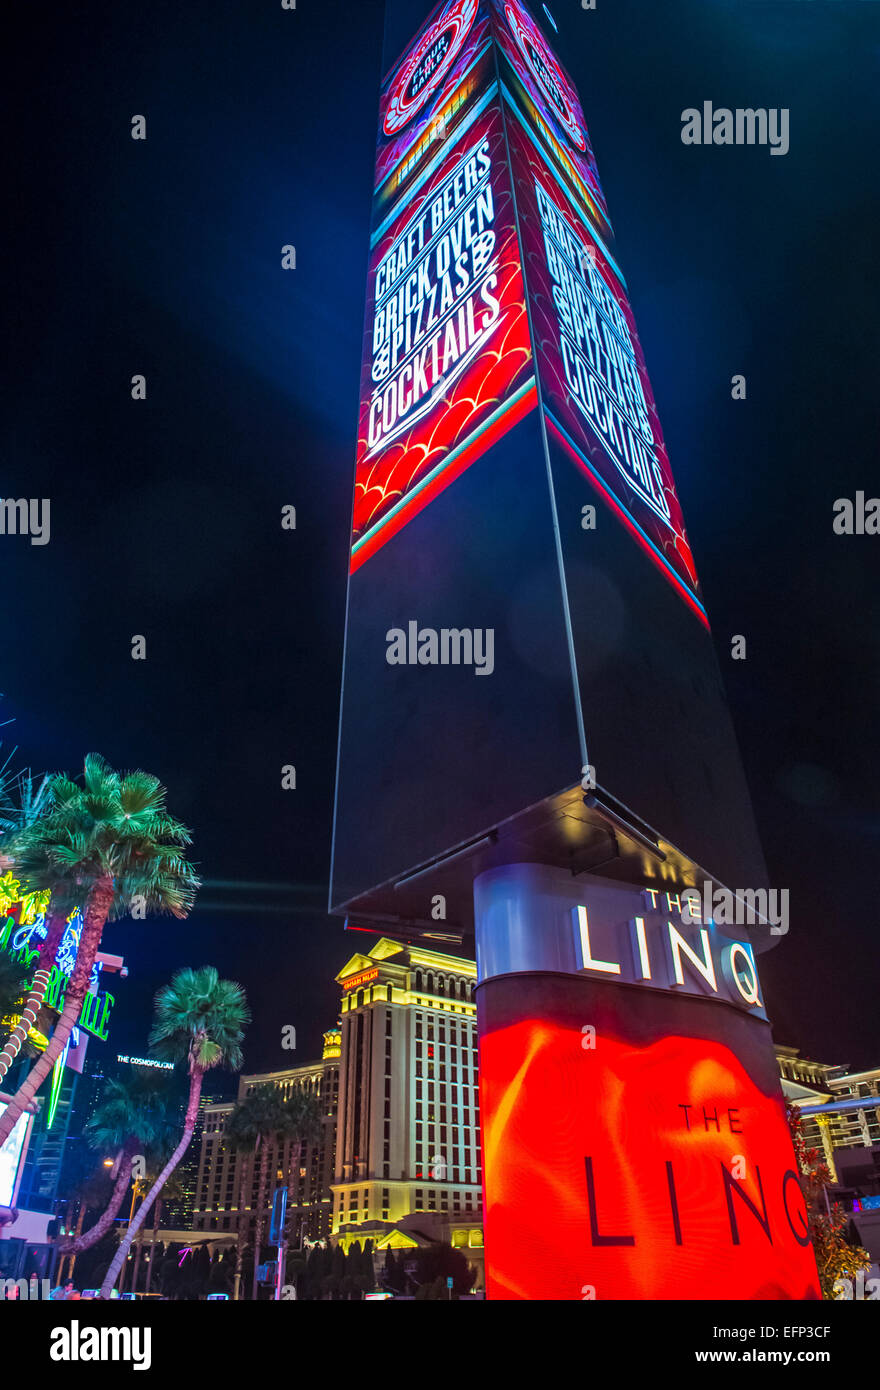 The Linq Sign in Las Vegas strip Stock Photo